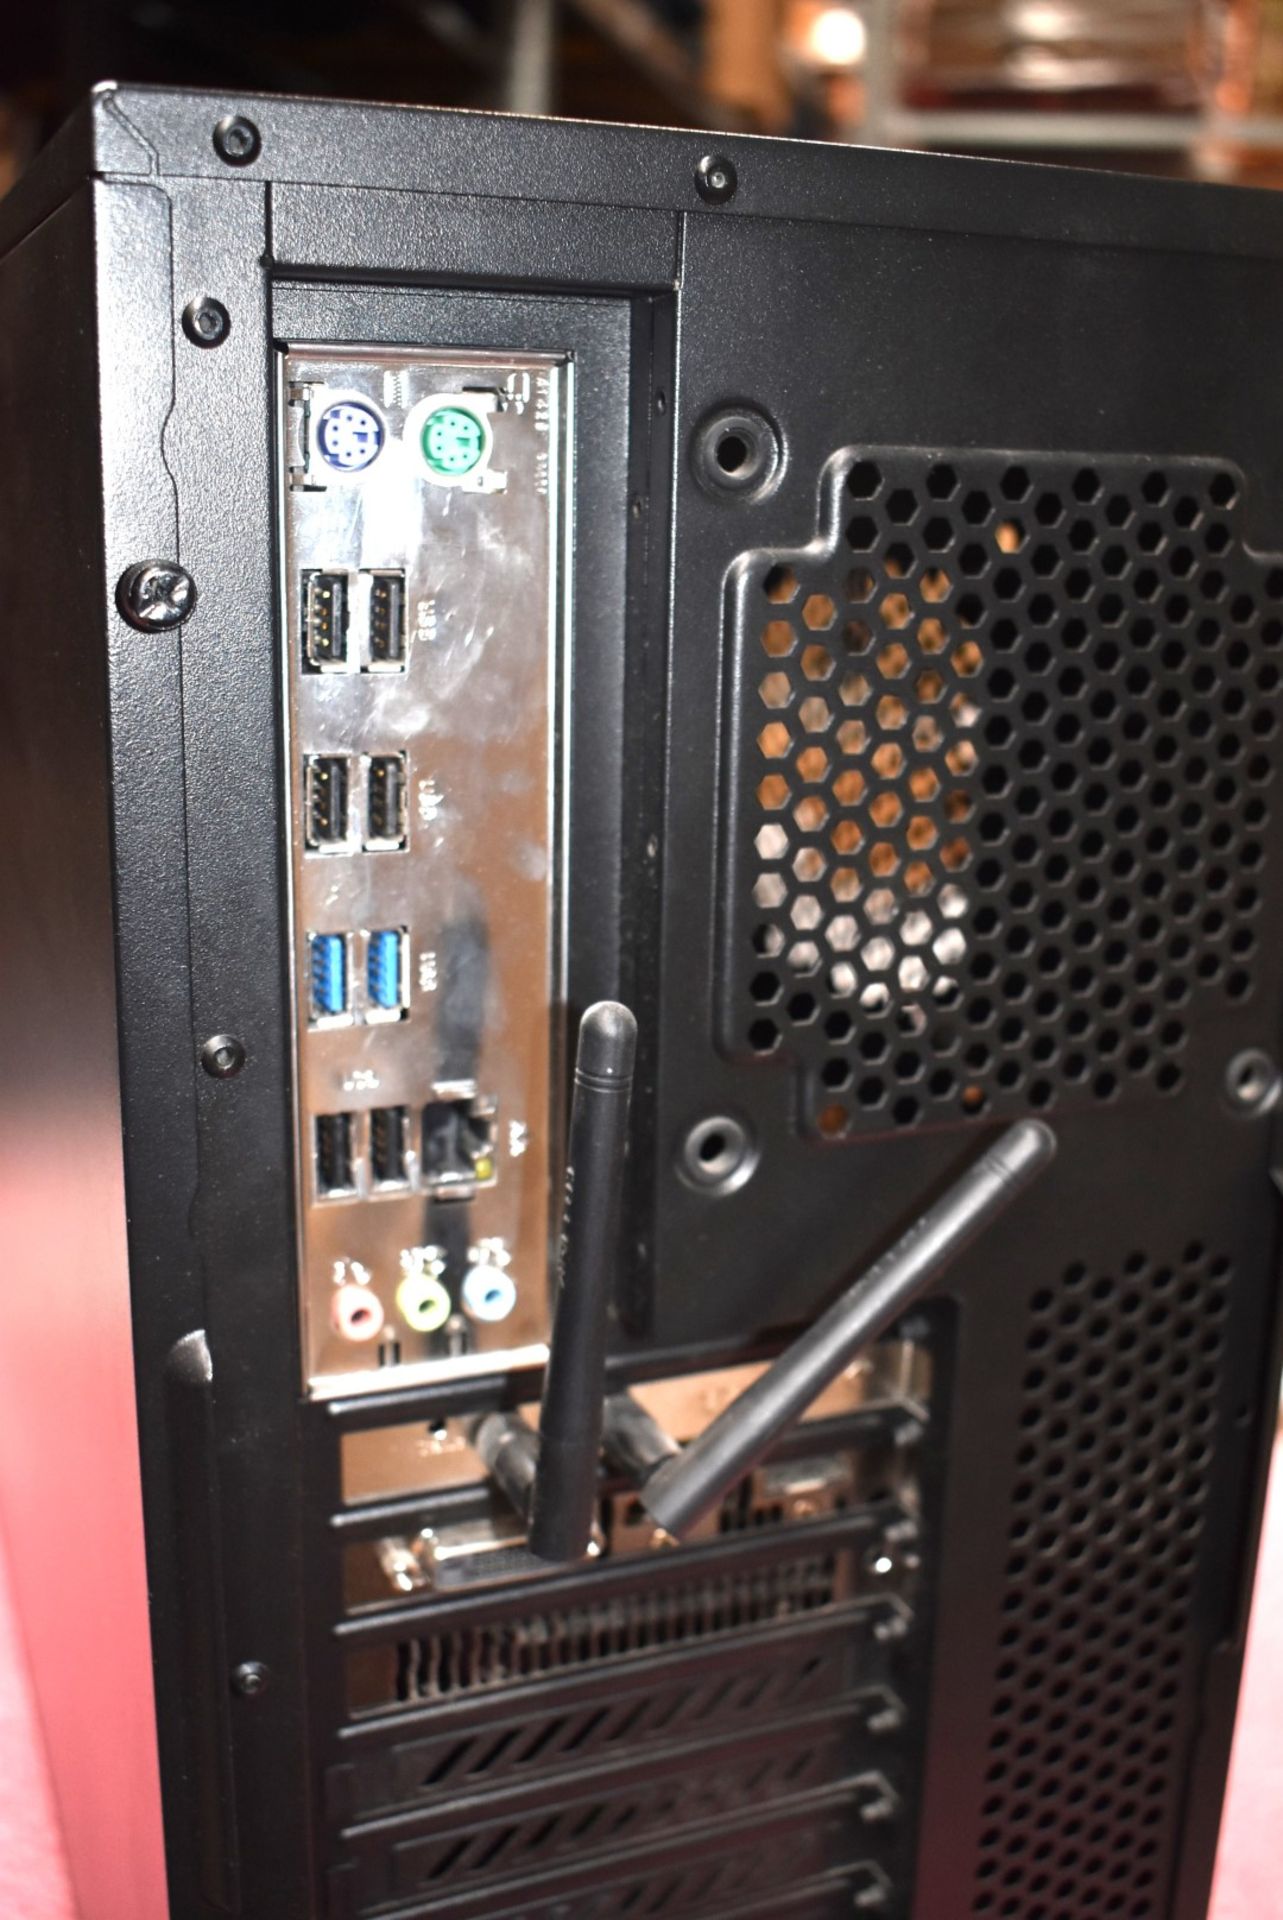 1 x Desktop Gaming PC Featuring an AMD FX6350 Processor, 8GB Ram and a GTX1050ti Graphics Card - Image 11 of 11